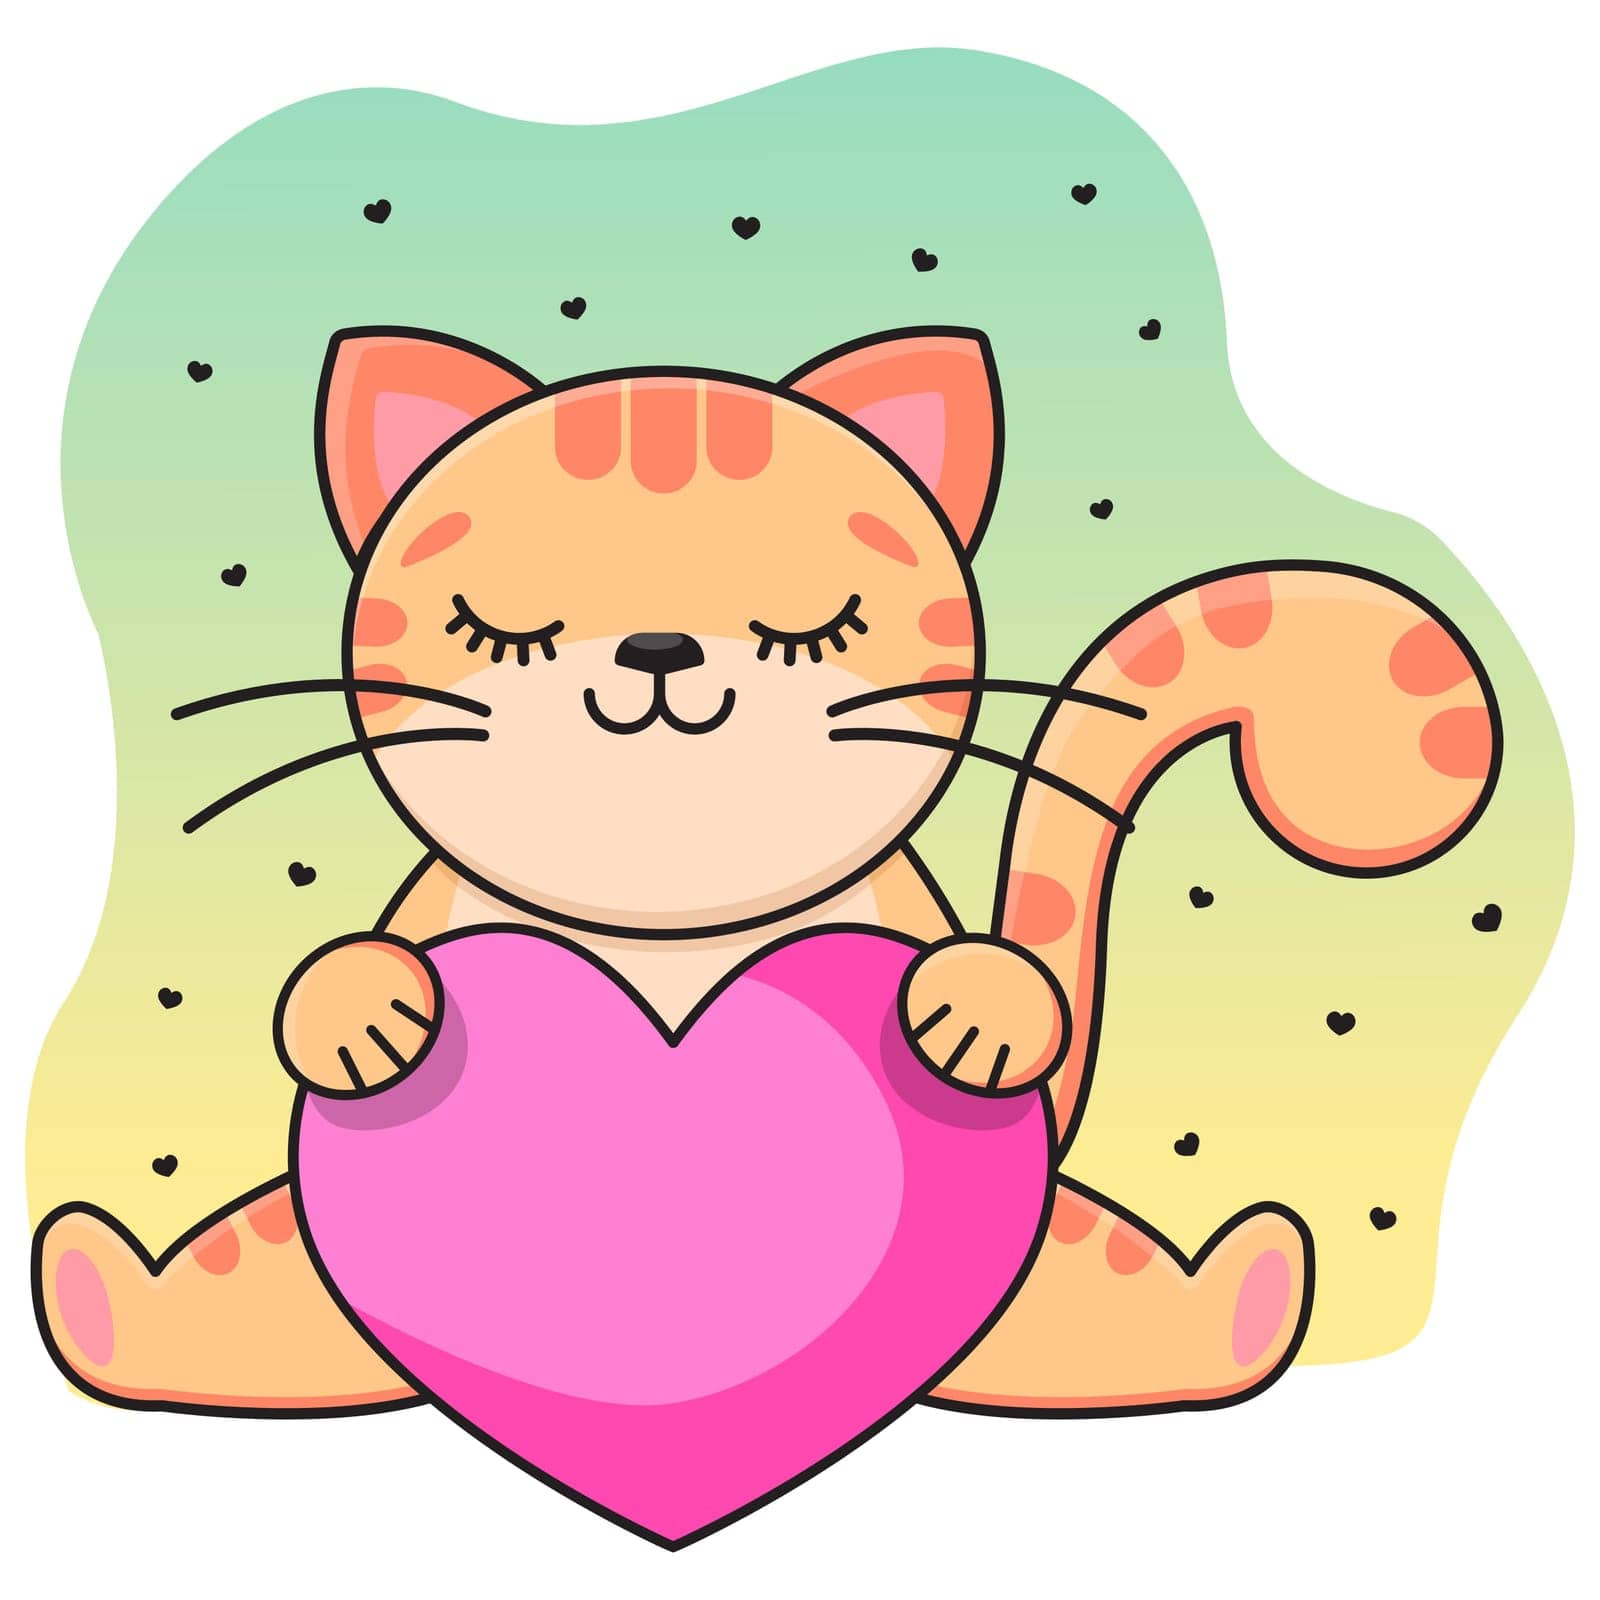 A gray smiling cat holds a red heart in its paws. Childrens print. Vector illustration.